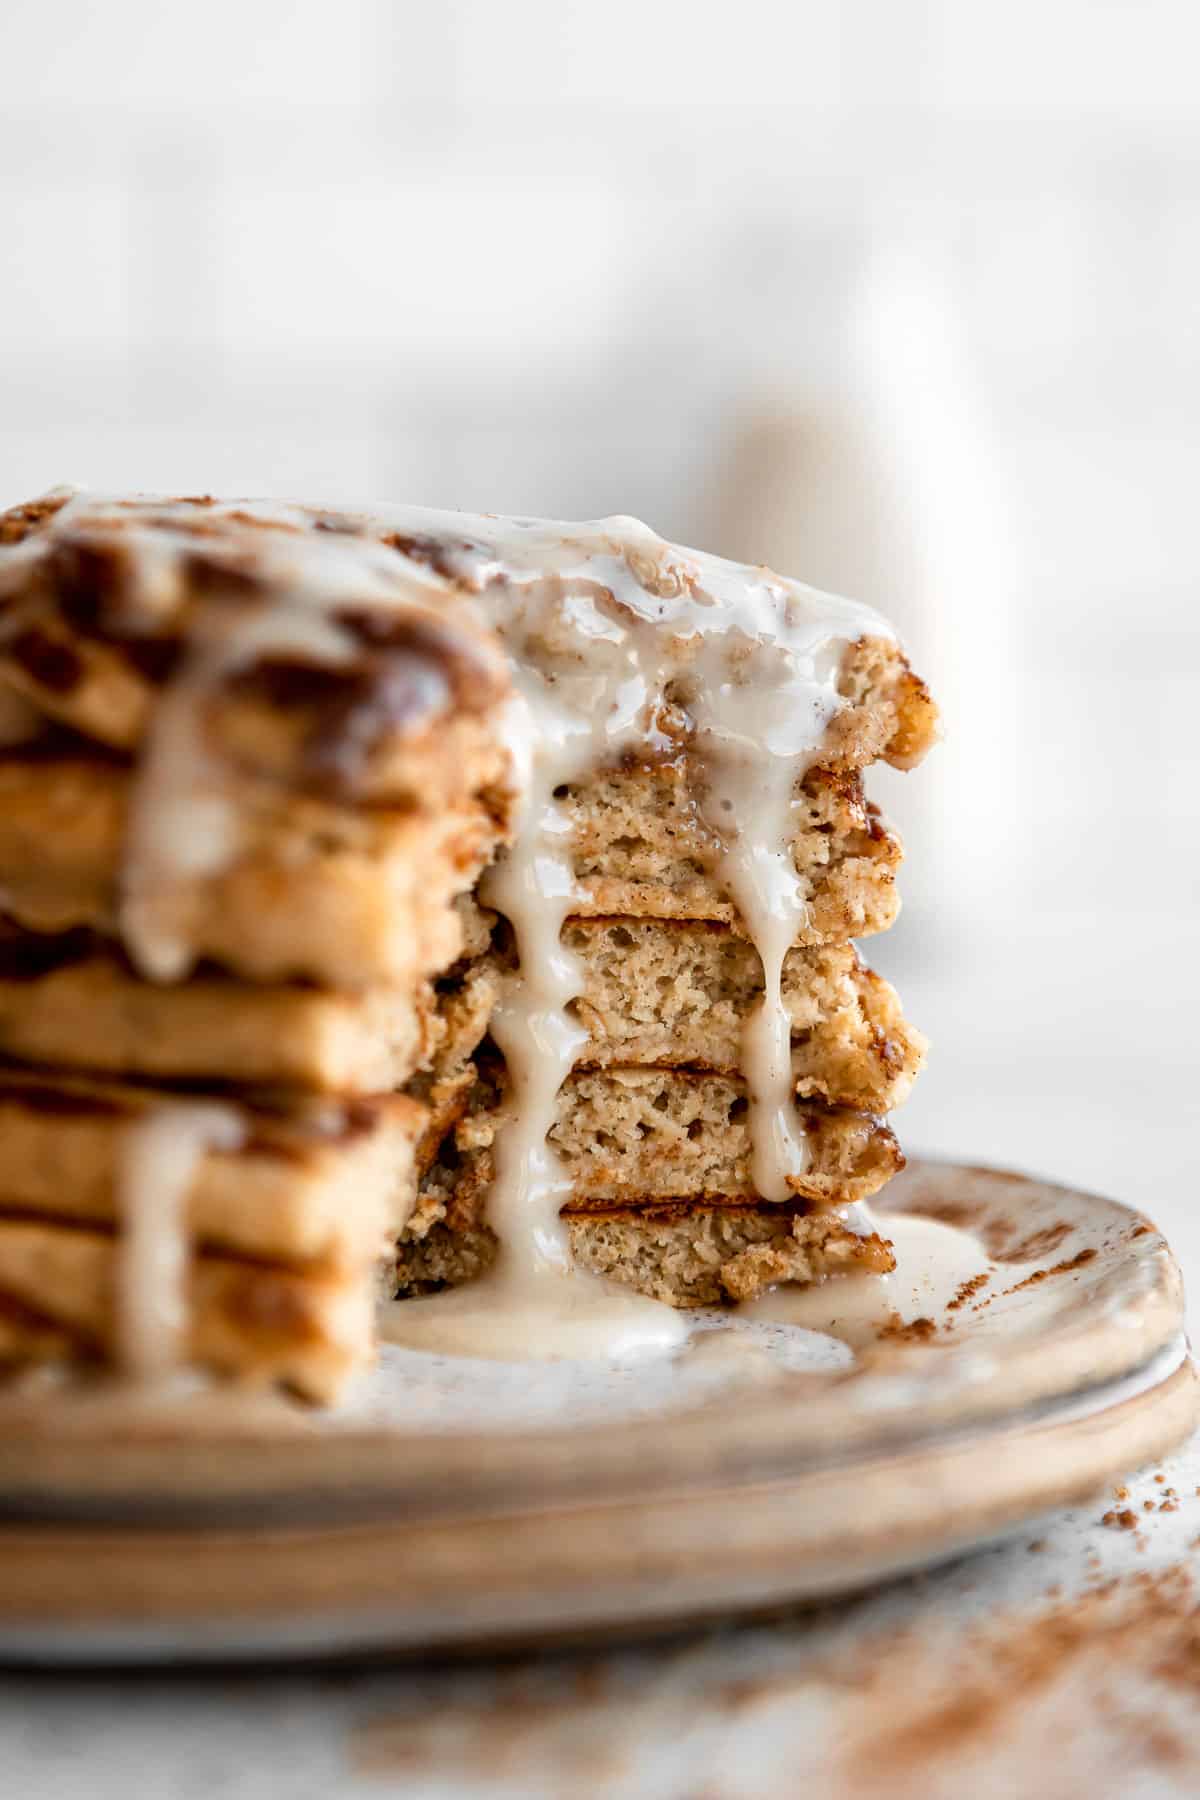 up close image of the cinnamon roll pancakes with a bite cut out